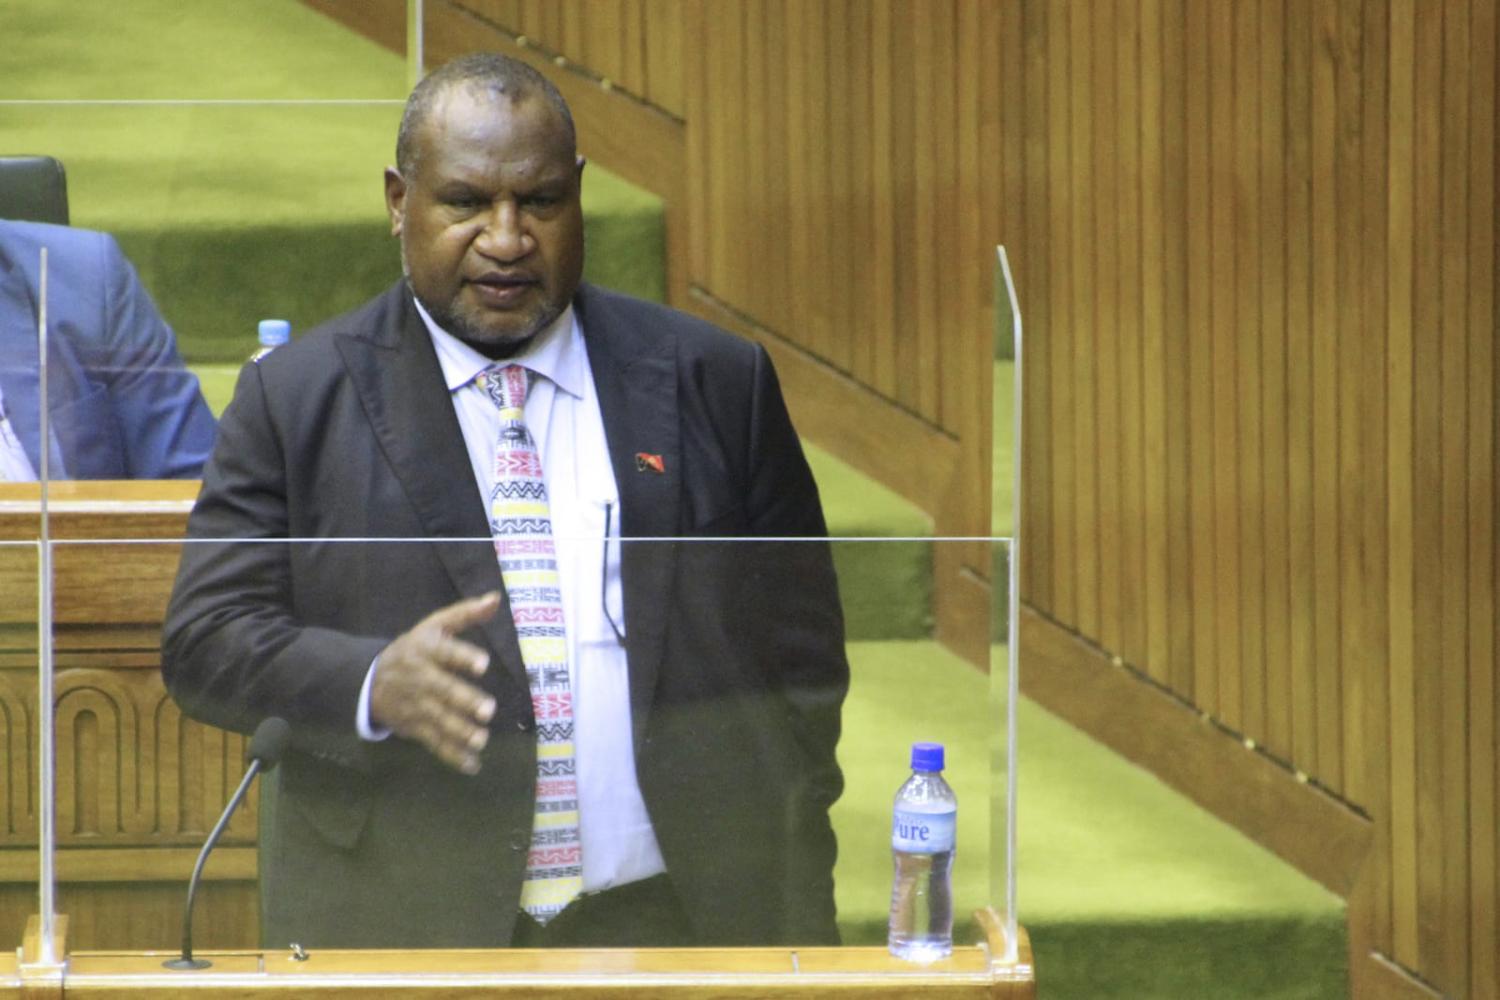 Papua New Guinea’s Prime Minister James Marape speaks in parliament after he was sworn in for his second term as prime minister in Port Moresby on 9 August (Andrew Kutan/AFP via Getty Images)